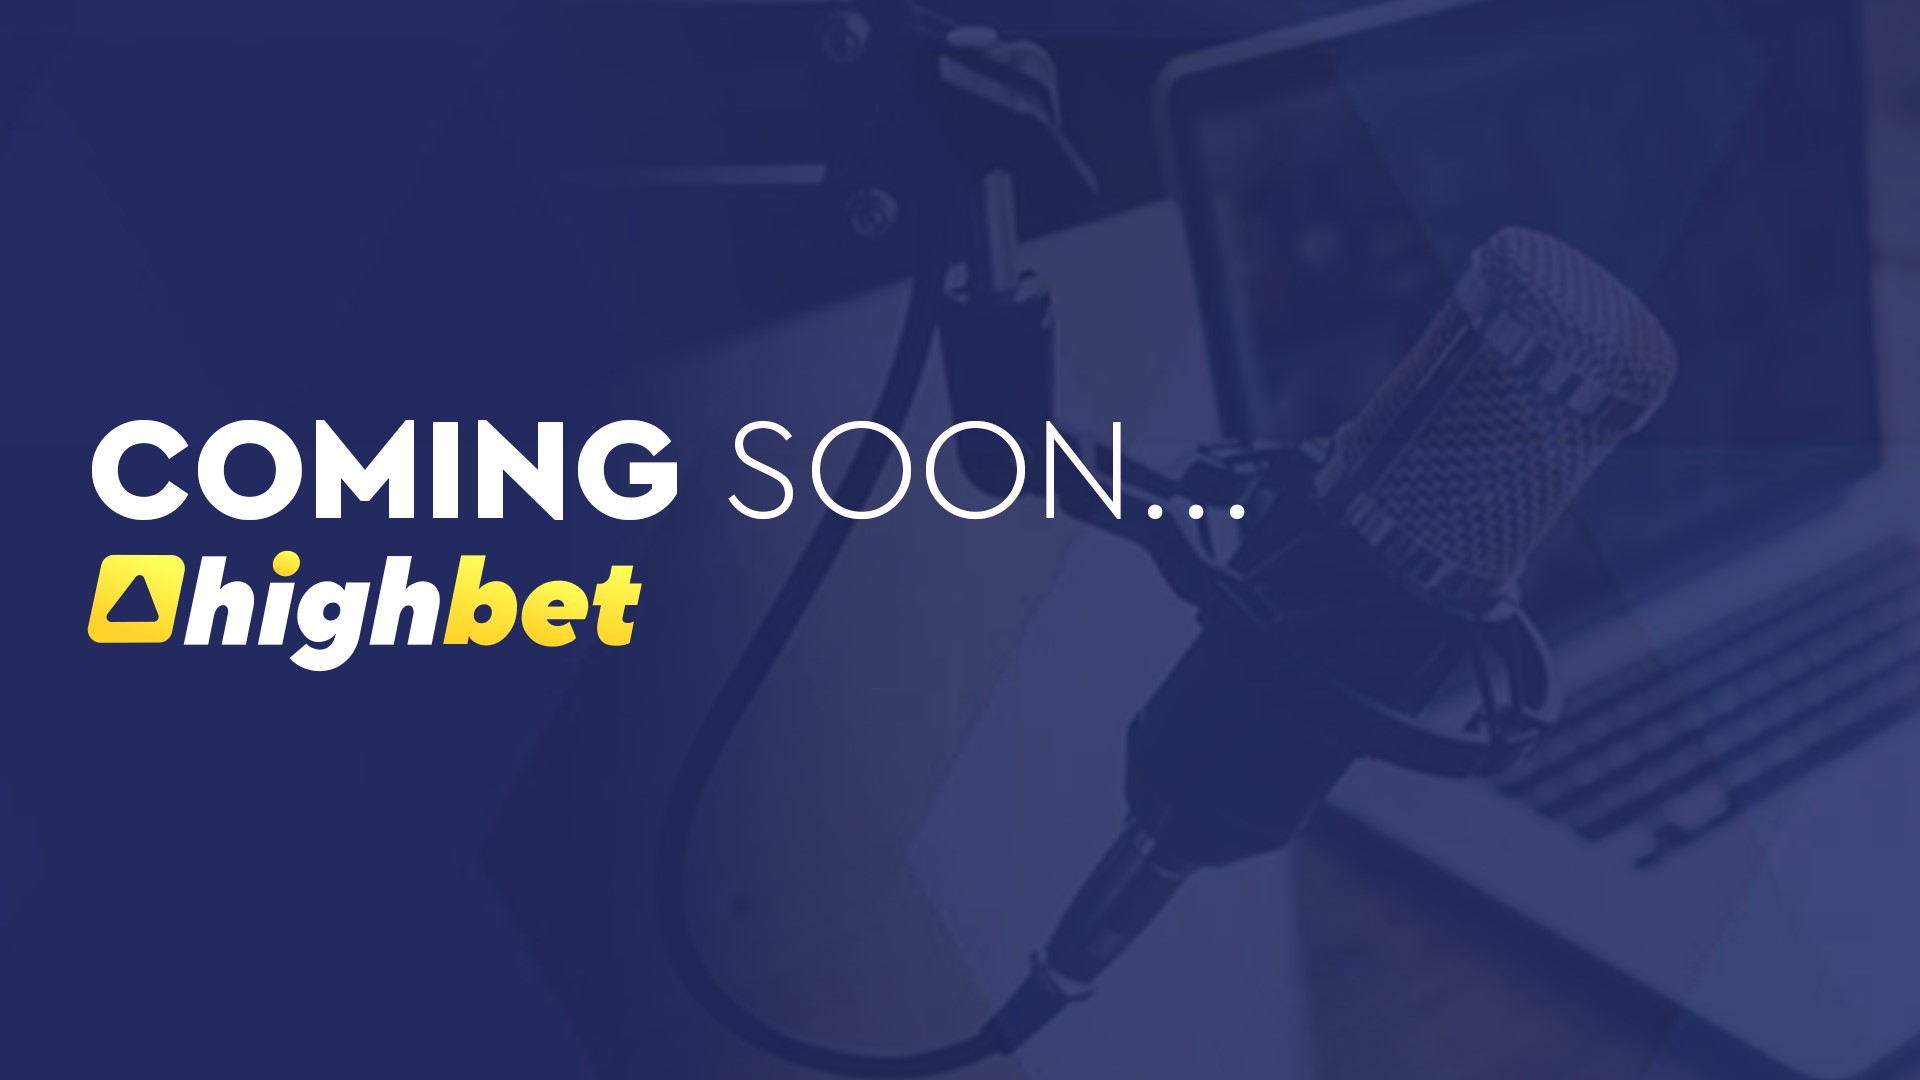 Coming Soon to Highbet...